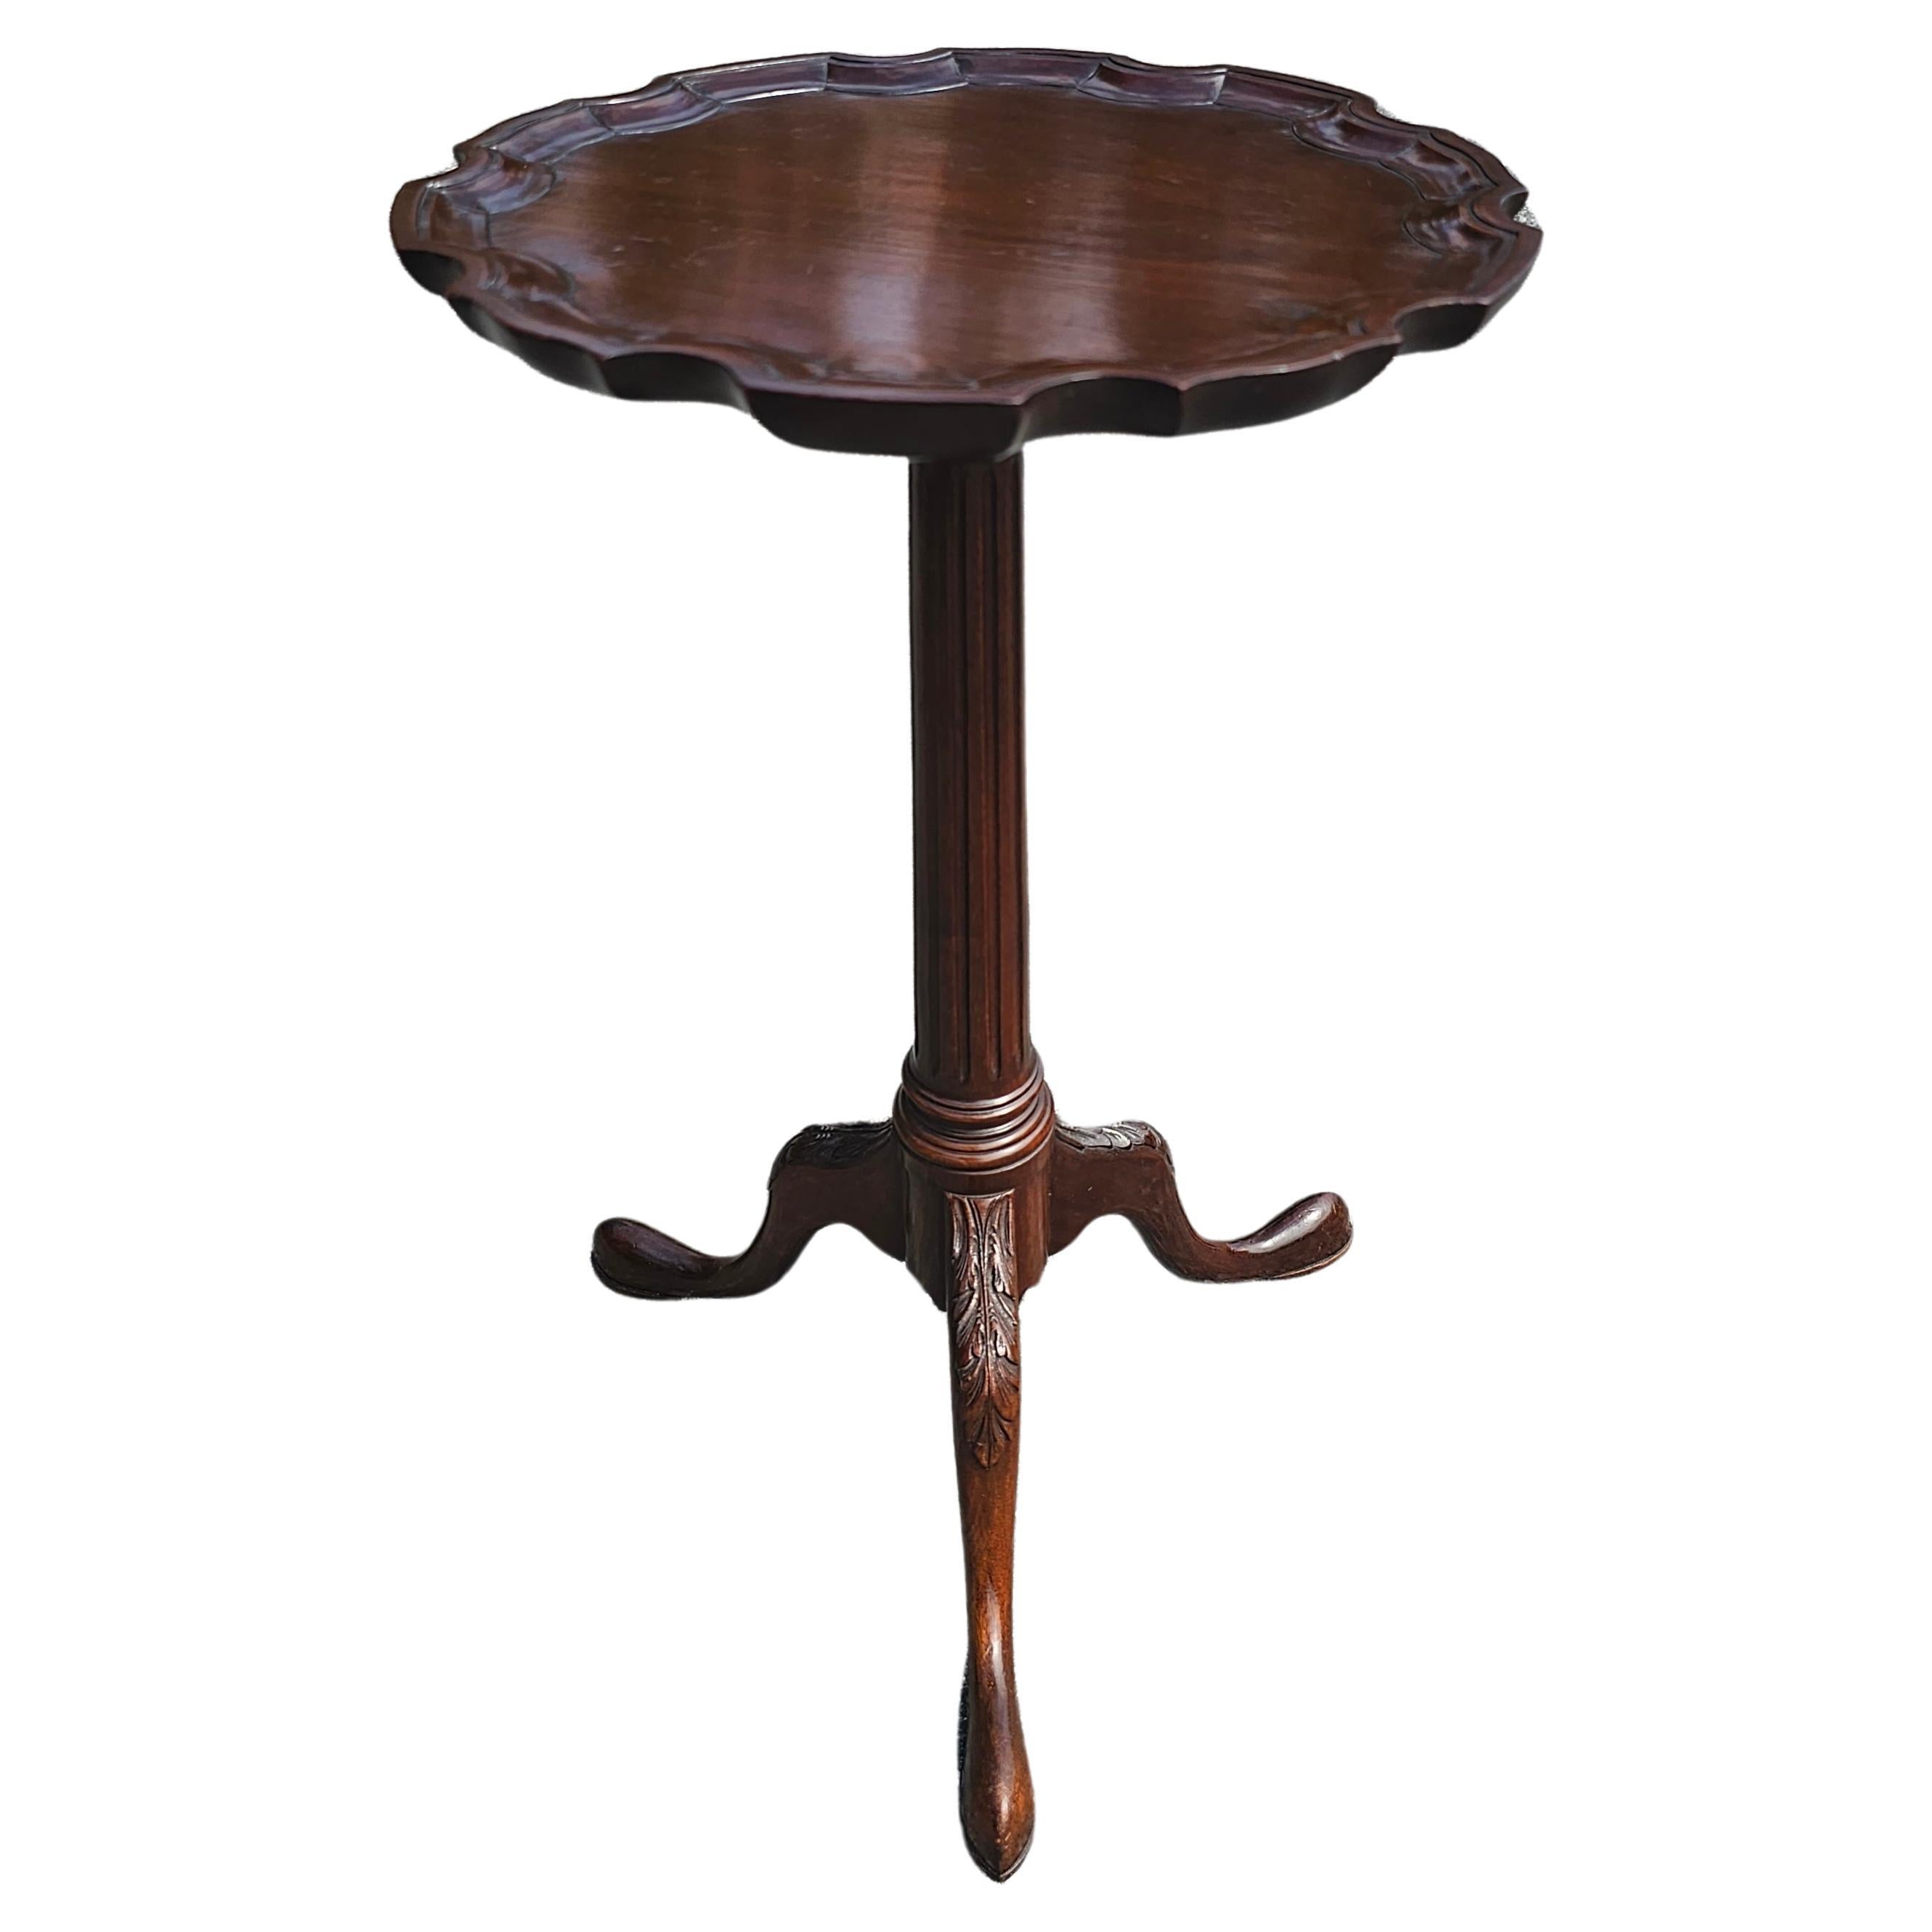 Early 20th Century George III Style Mahogany Galleried Refinished Candle Stand